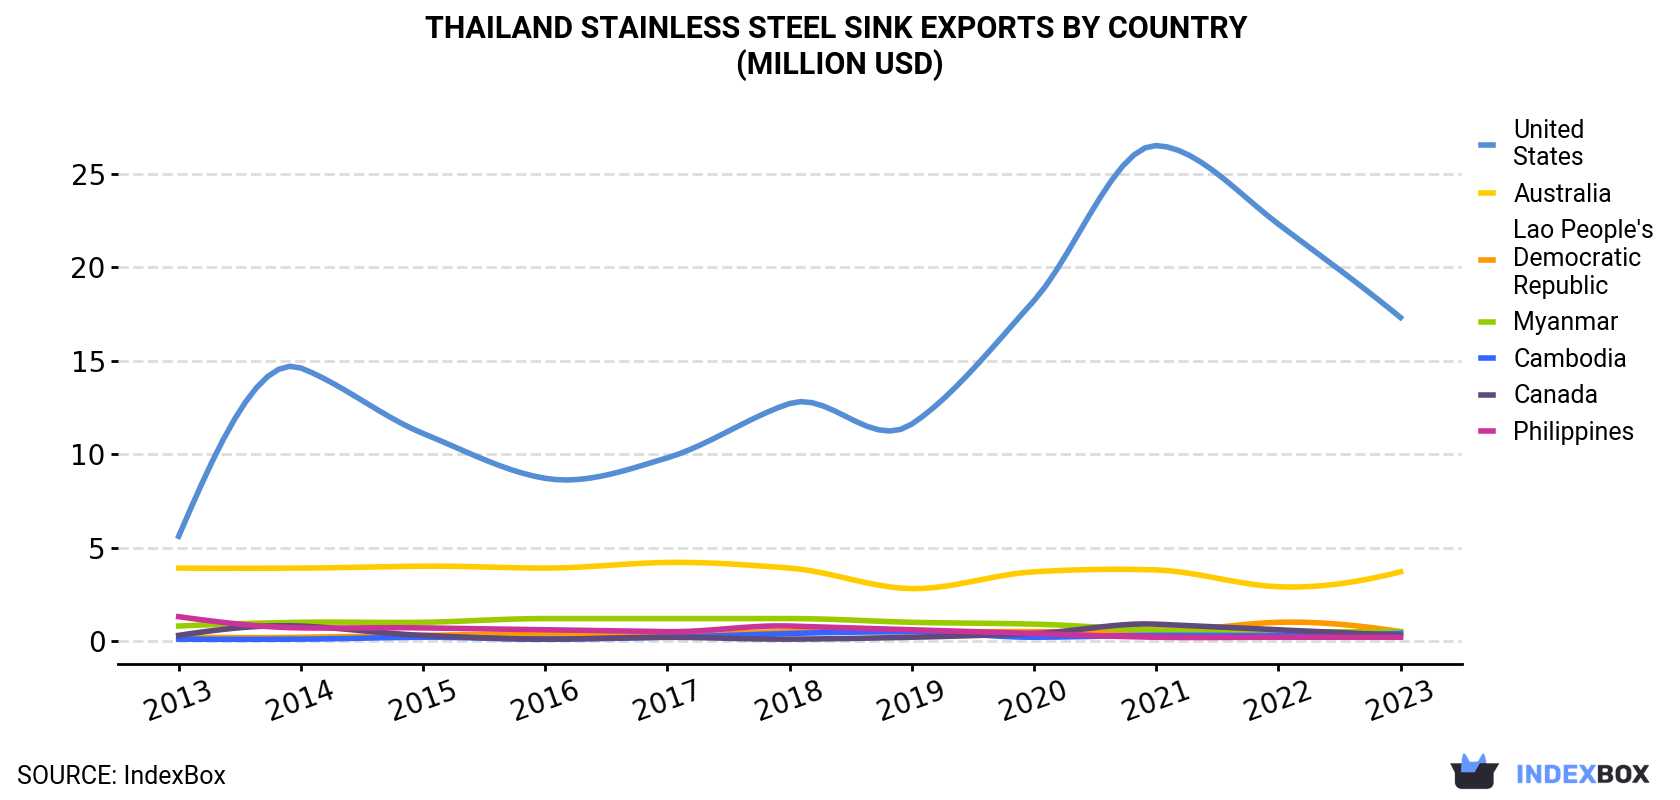 Thailand Stainless Steel Sink Exports By Country (Million USD)